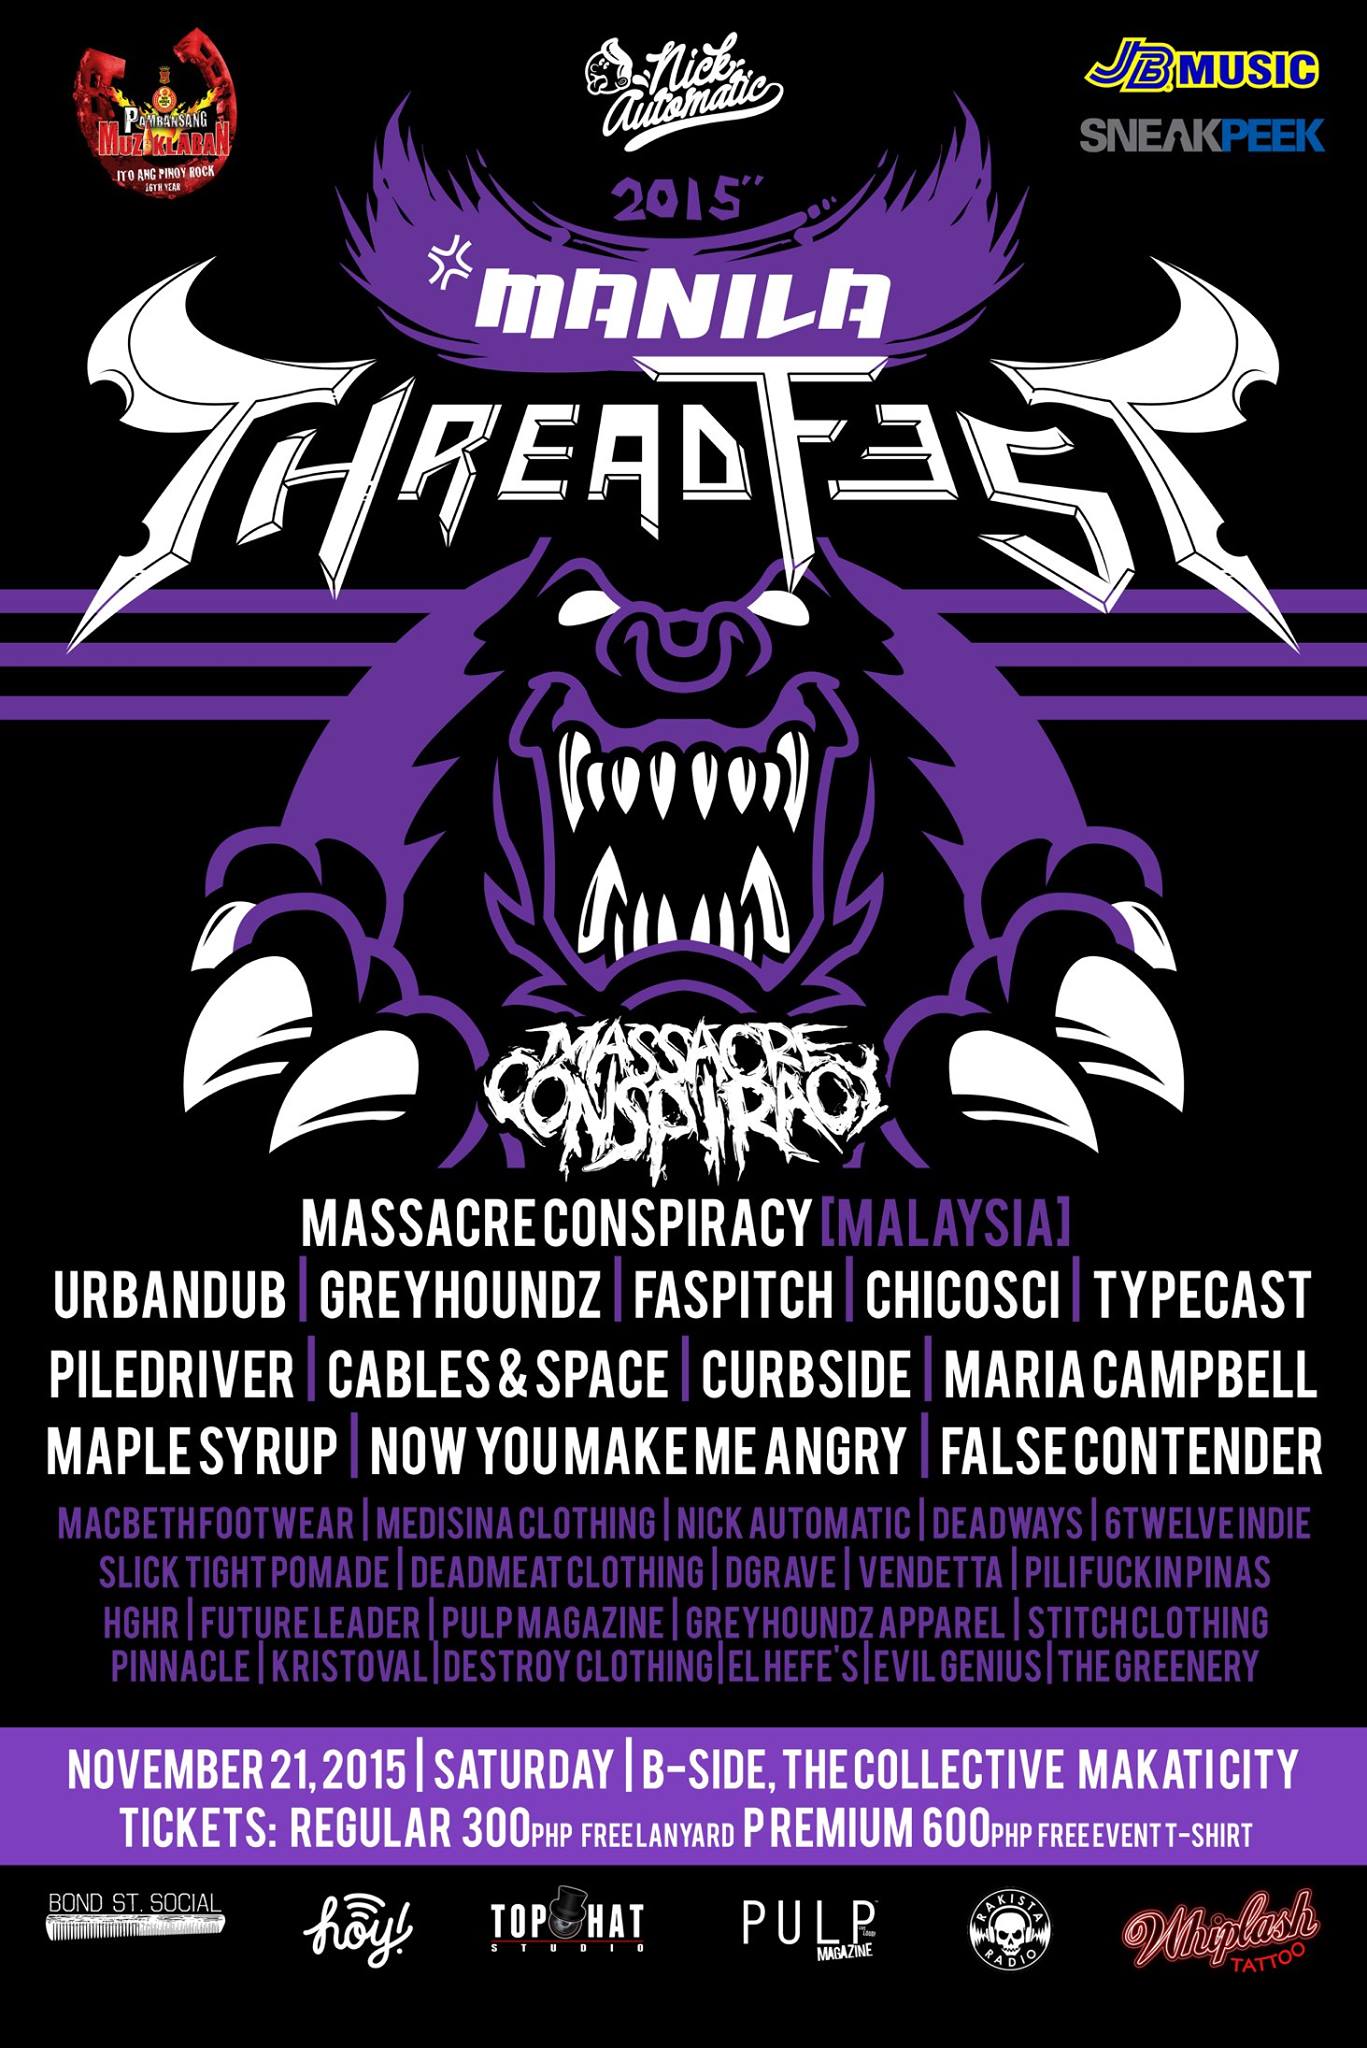 THREADFEST MANILA 2015 clock Today at 3:00pm Happening Now · 88°F Mostly Cloudy pin Show Map B-Side, The Collective 7274 Malugay Street, Makati, Philippines The Most Favorite Music and Clothing Gathering! with perfromances by: ------------------------------------------- - Urbandub - Greyhoundz - Chicosci - Faspitch - Typecast - Curbside - Piledriver - Maple Syrup - Maria Campbell - Cables & Space - False Contender - Now You Make Me Angry Merchandise booths by: ------------------------------------------- - Macbeth - Medisina Clothing - Nick Automatic - Deadways - Destroy Clothing by Slapshock - 612 Indie - The Greenery - Evil Genius - Deadmeat Clothing - DGRAVE / Vendetta - PILIFUCKINPINAS - HGHR / Future Leader - Pulp Magazine - Greyhoundz Apparel / Stitch Clothing - Slicktight Pomade - Pinnacle - Kristoval Art - El Hefe's Supply Goods Tickets Prices: 300php Entrance + FREE Threadfest Lanyard 600php Entrance + Threadfest T-Shirt Tickets available at Whiplash Tattoo Studio and at Nick Automatic - North Store